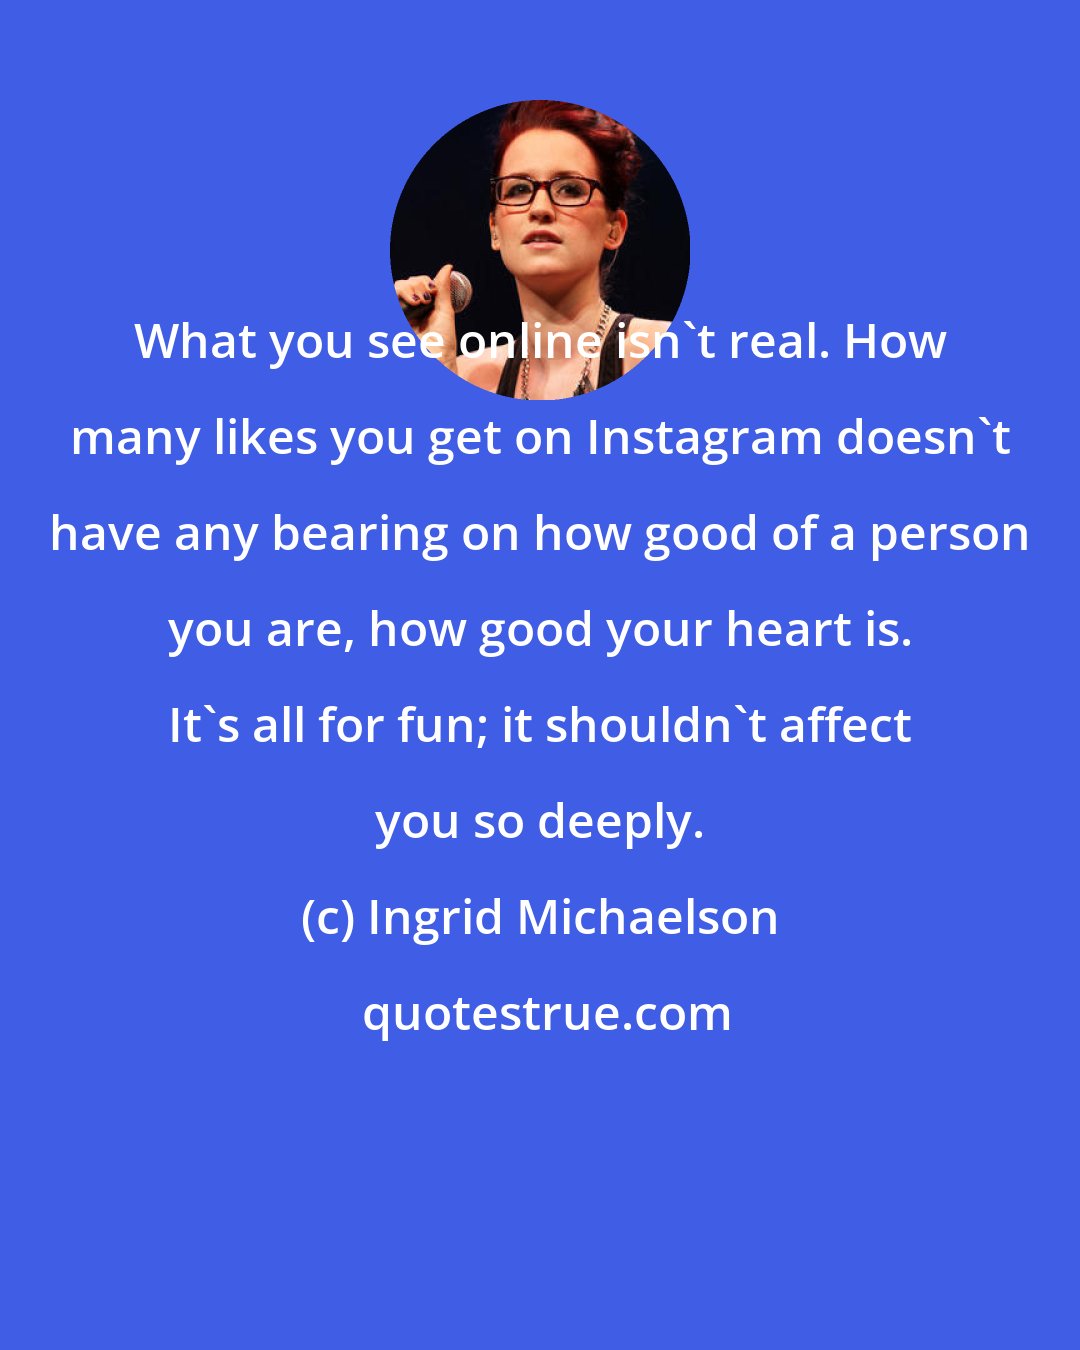 Ingrid Michaelson: What you see online isn't real. How many likes you get on Instagram doesn't have any bearing on how good of a person you are, how good your heart is. It's all for fun; it shouldn't affect you so deeply.